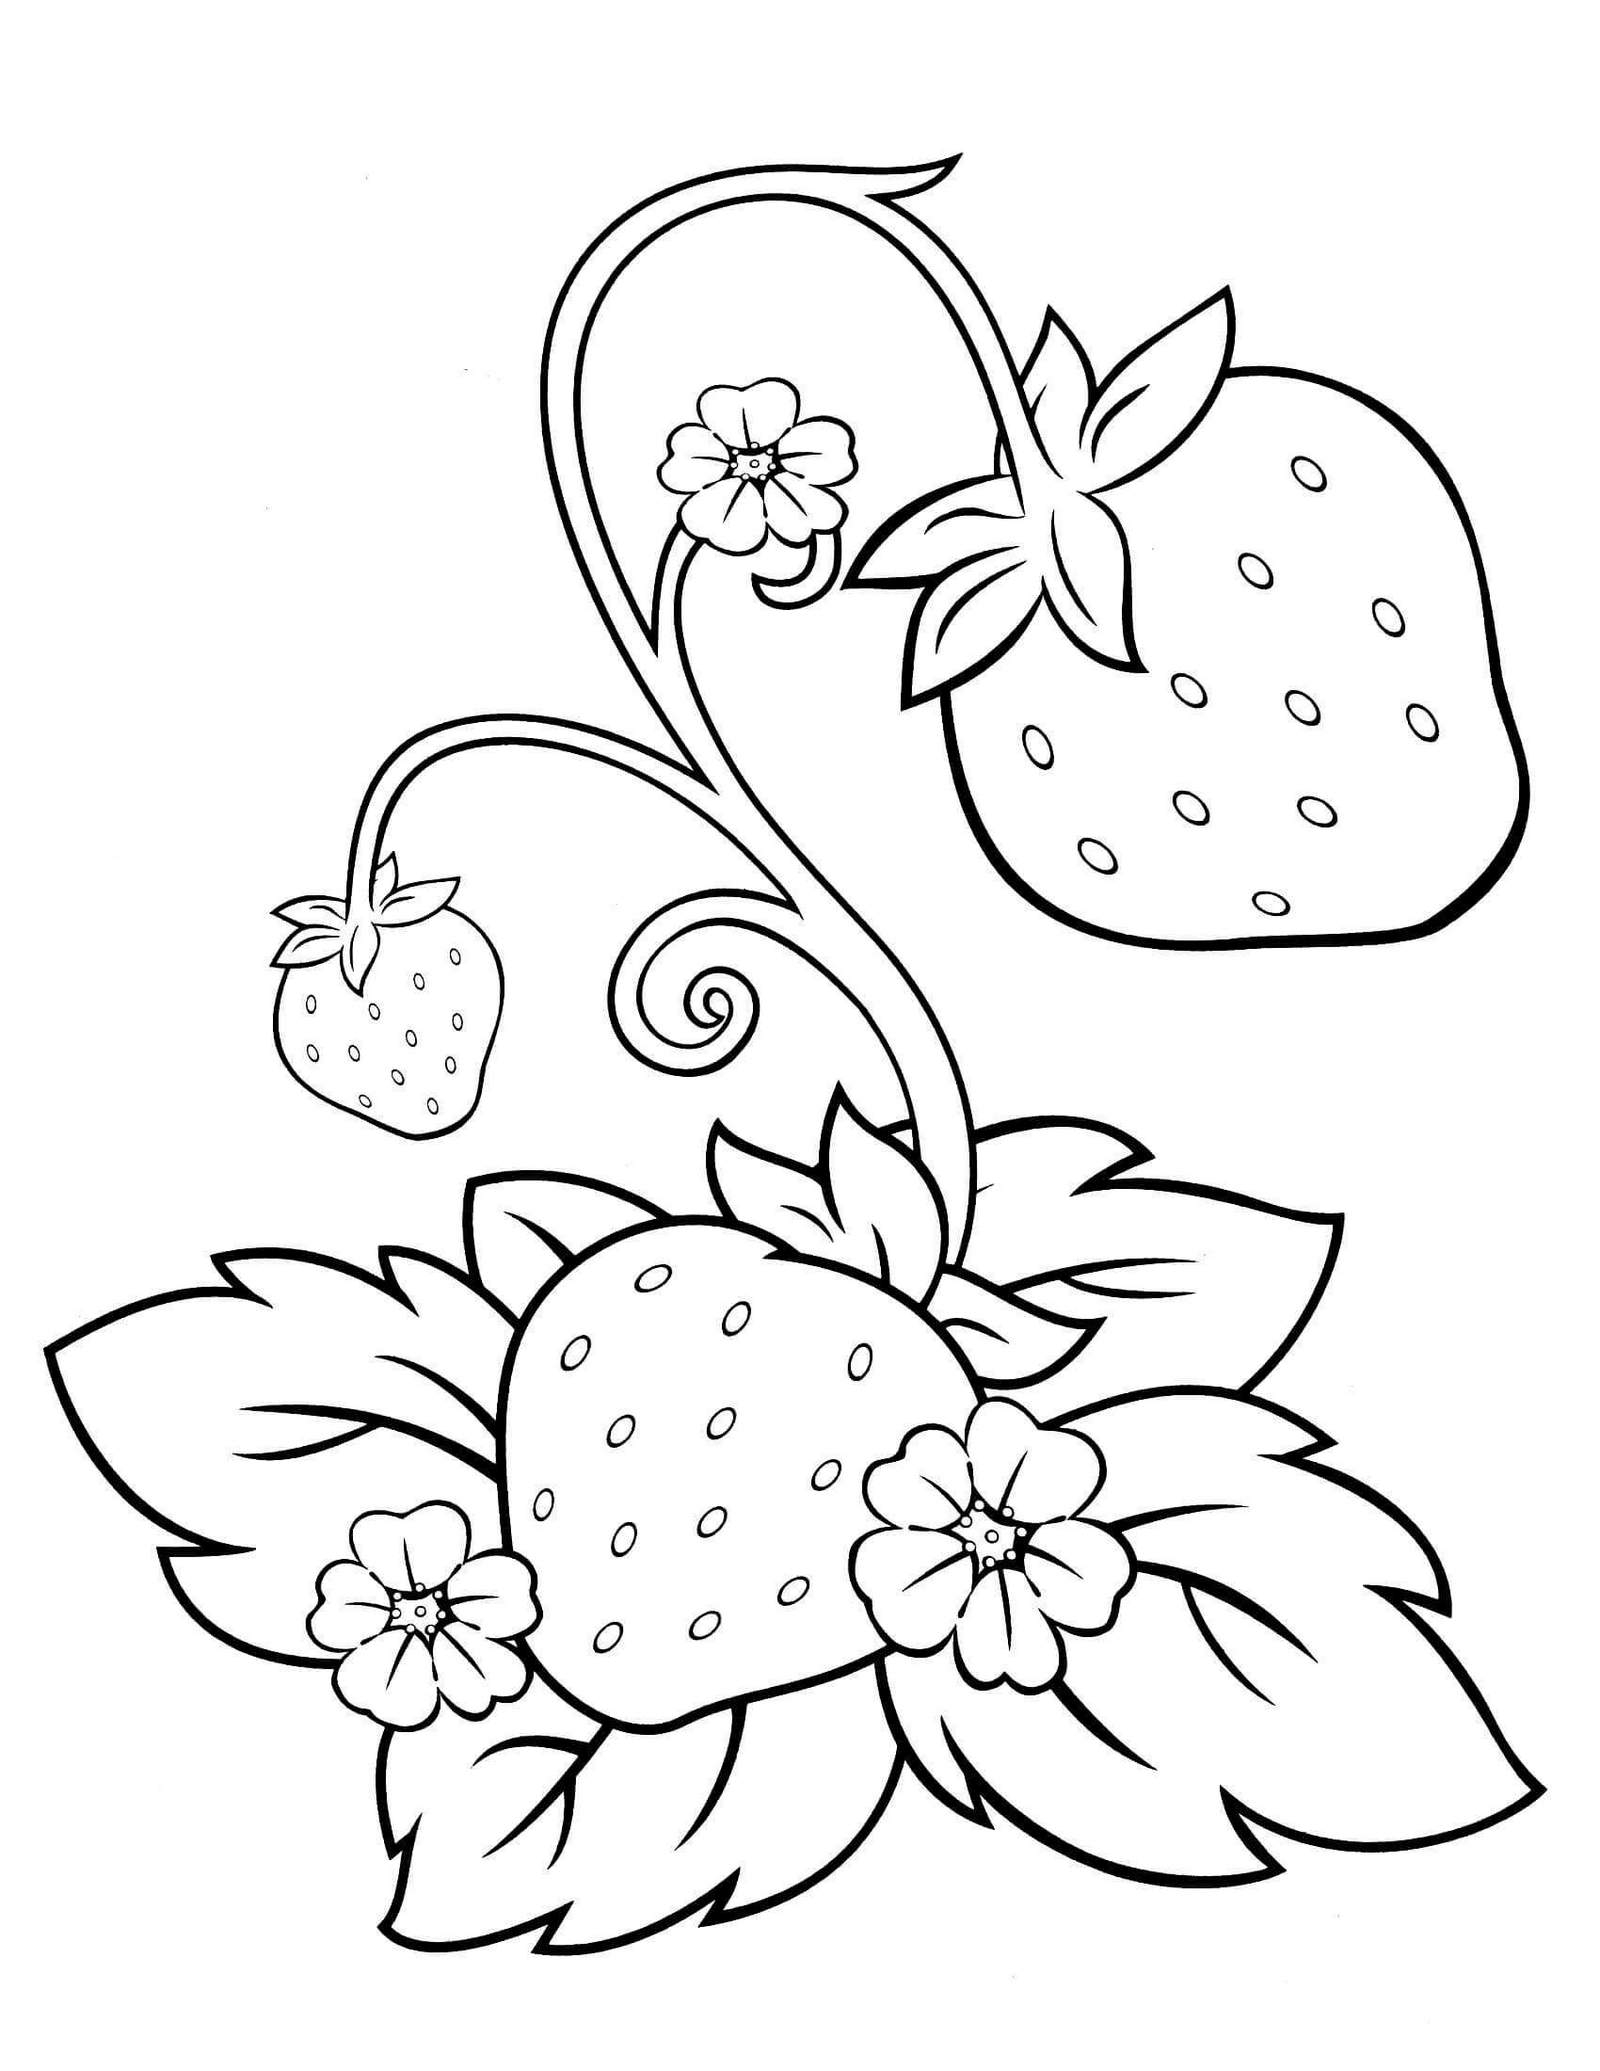 Coloring book dazzling strawberry for kids